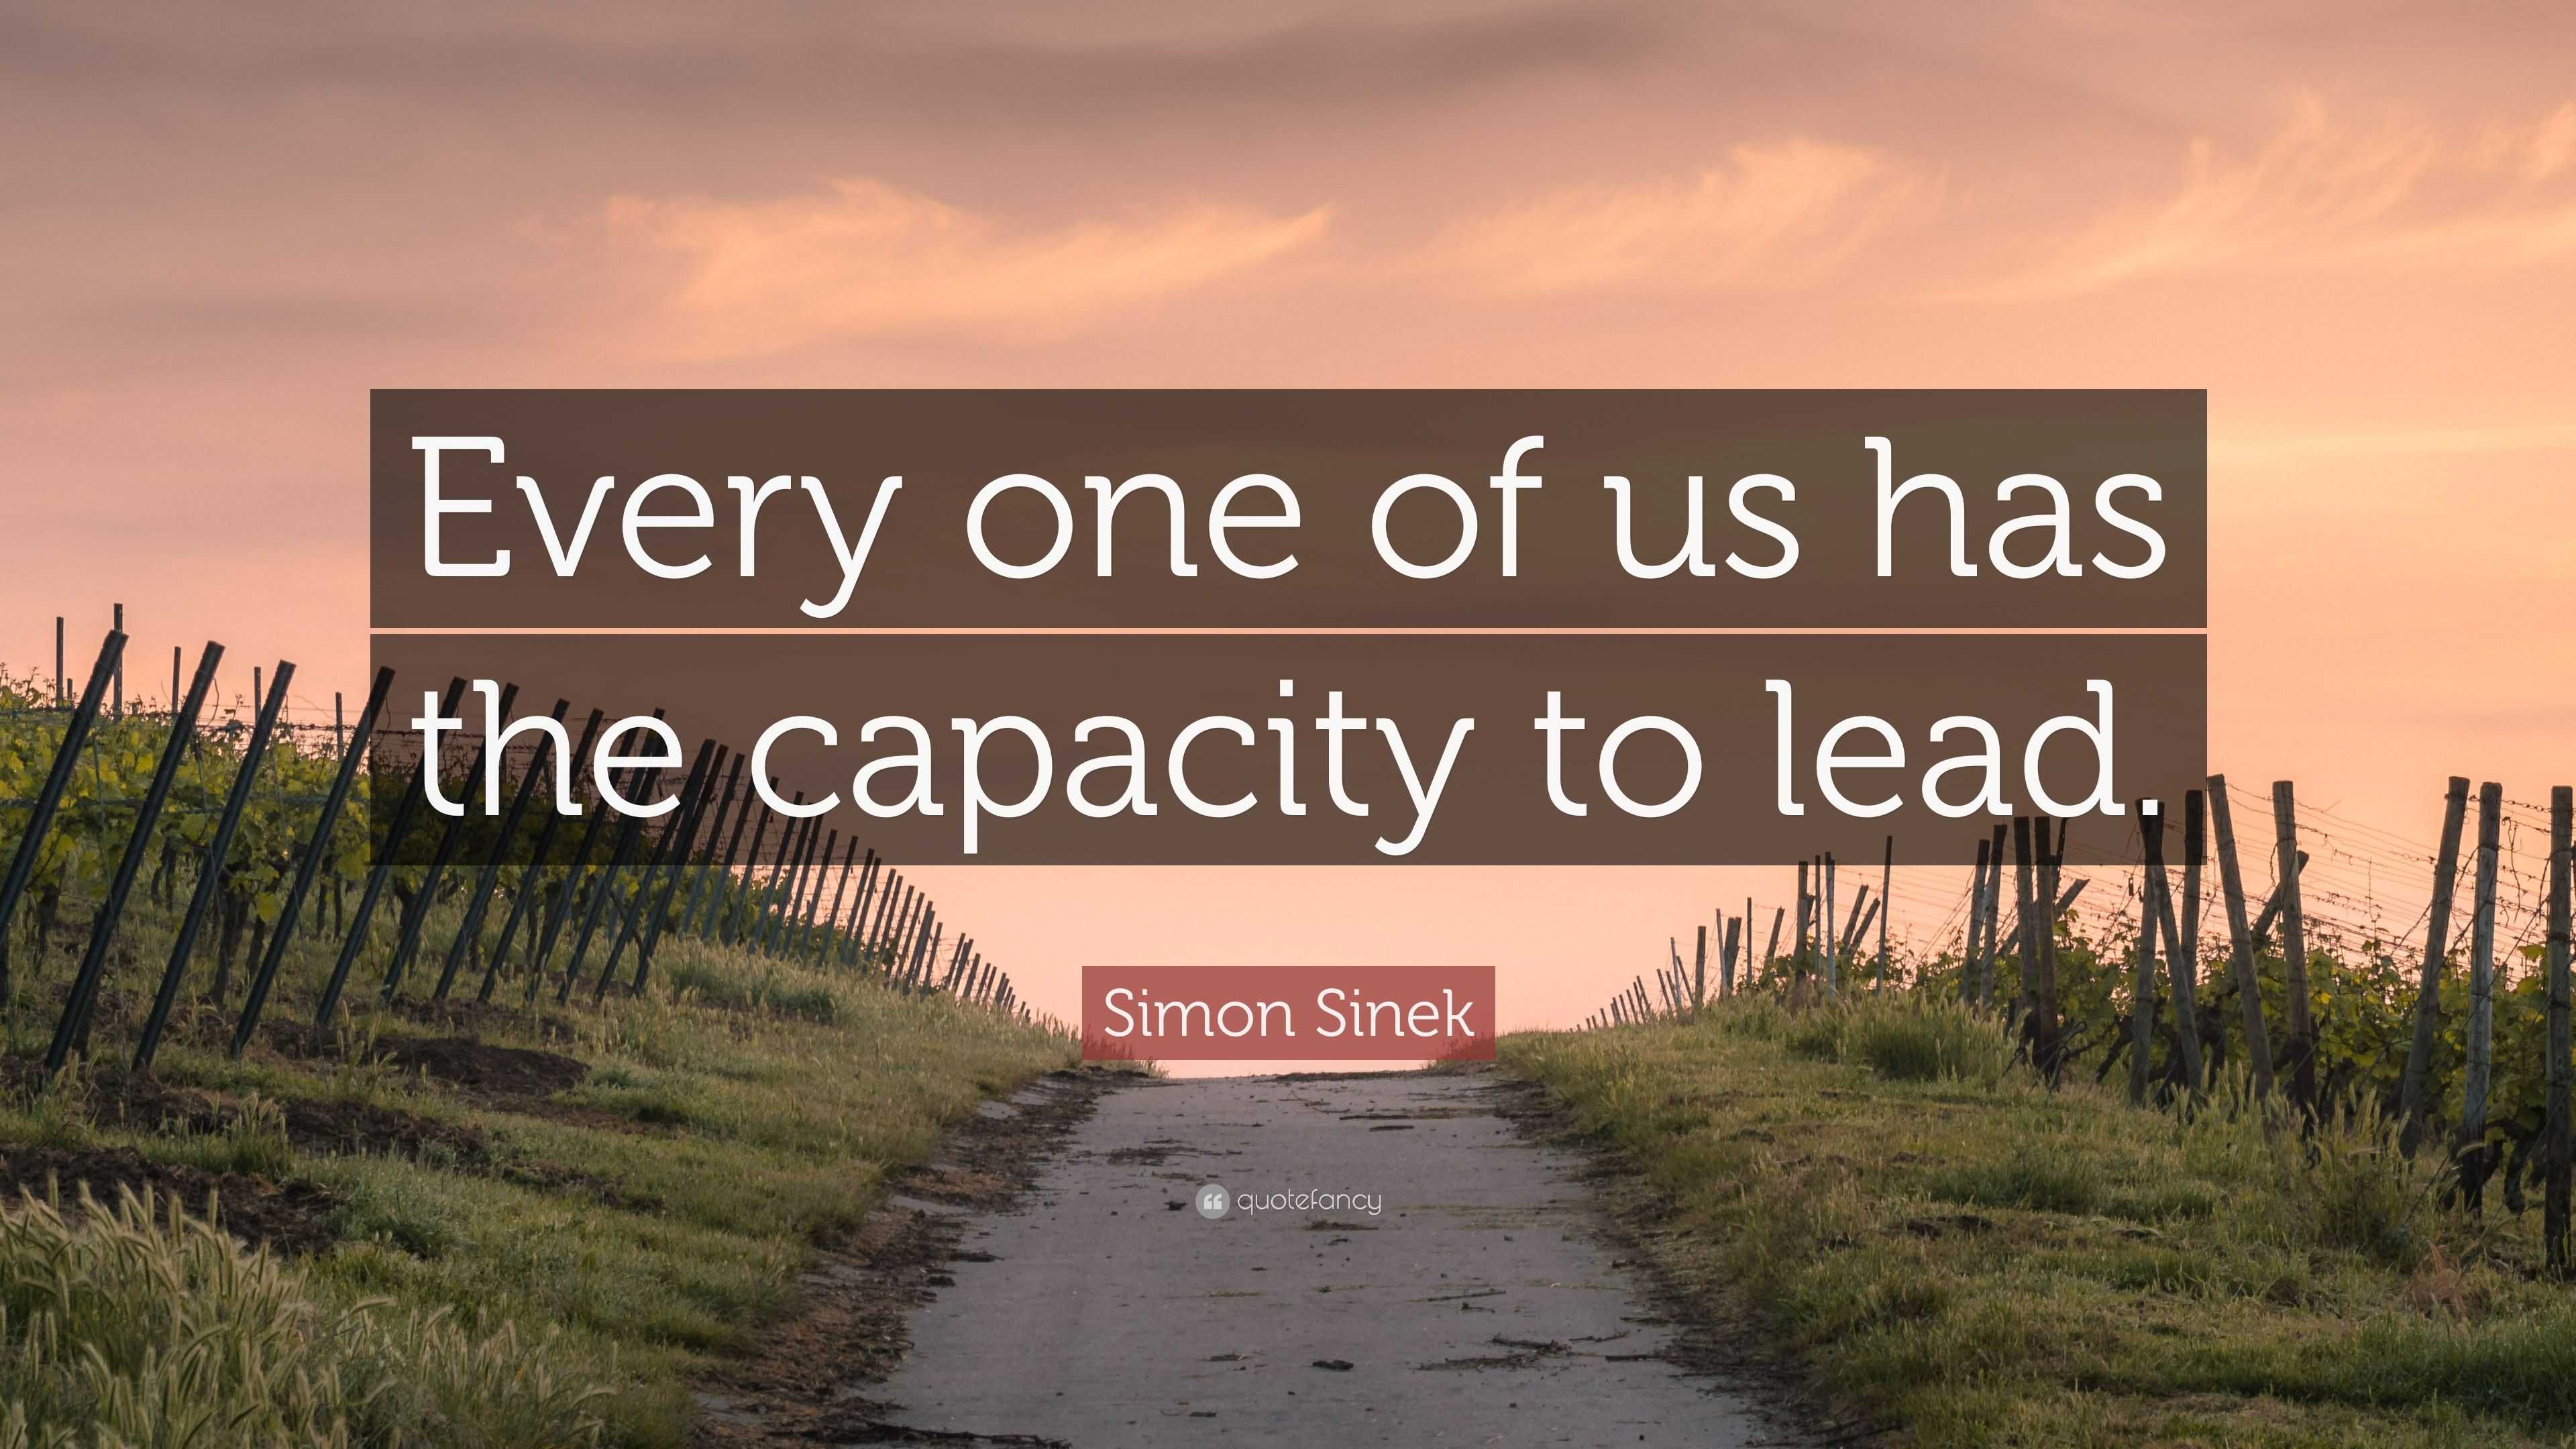 Simon Sinek Quote: “Every one of us has the capacity to lead.”